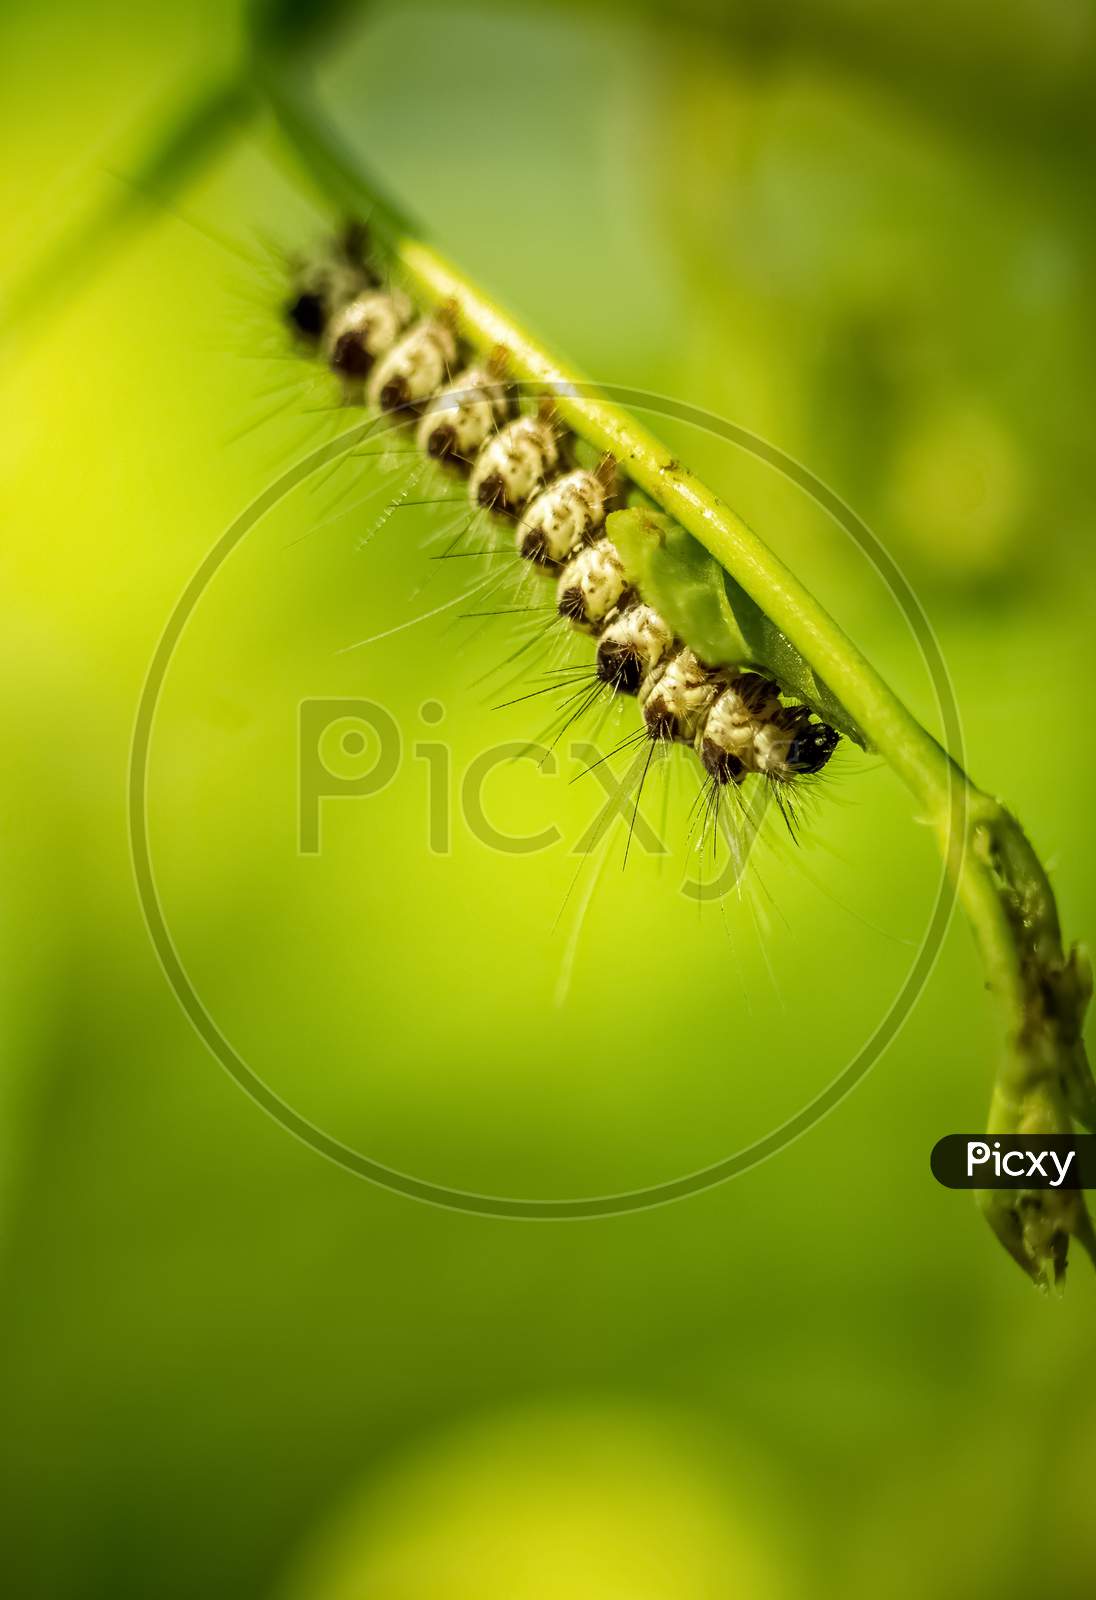 Caterpillar Eating A Leaf. Close Up Of Caterpillar Roaming And Eating A Green Leaf On Isolated On Green Background. Macro Photography.